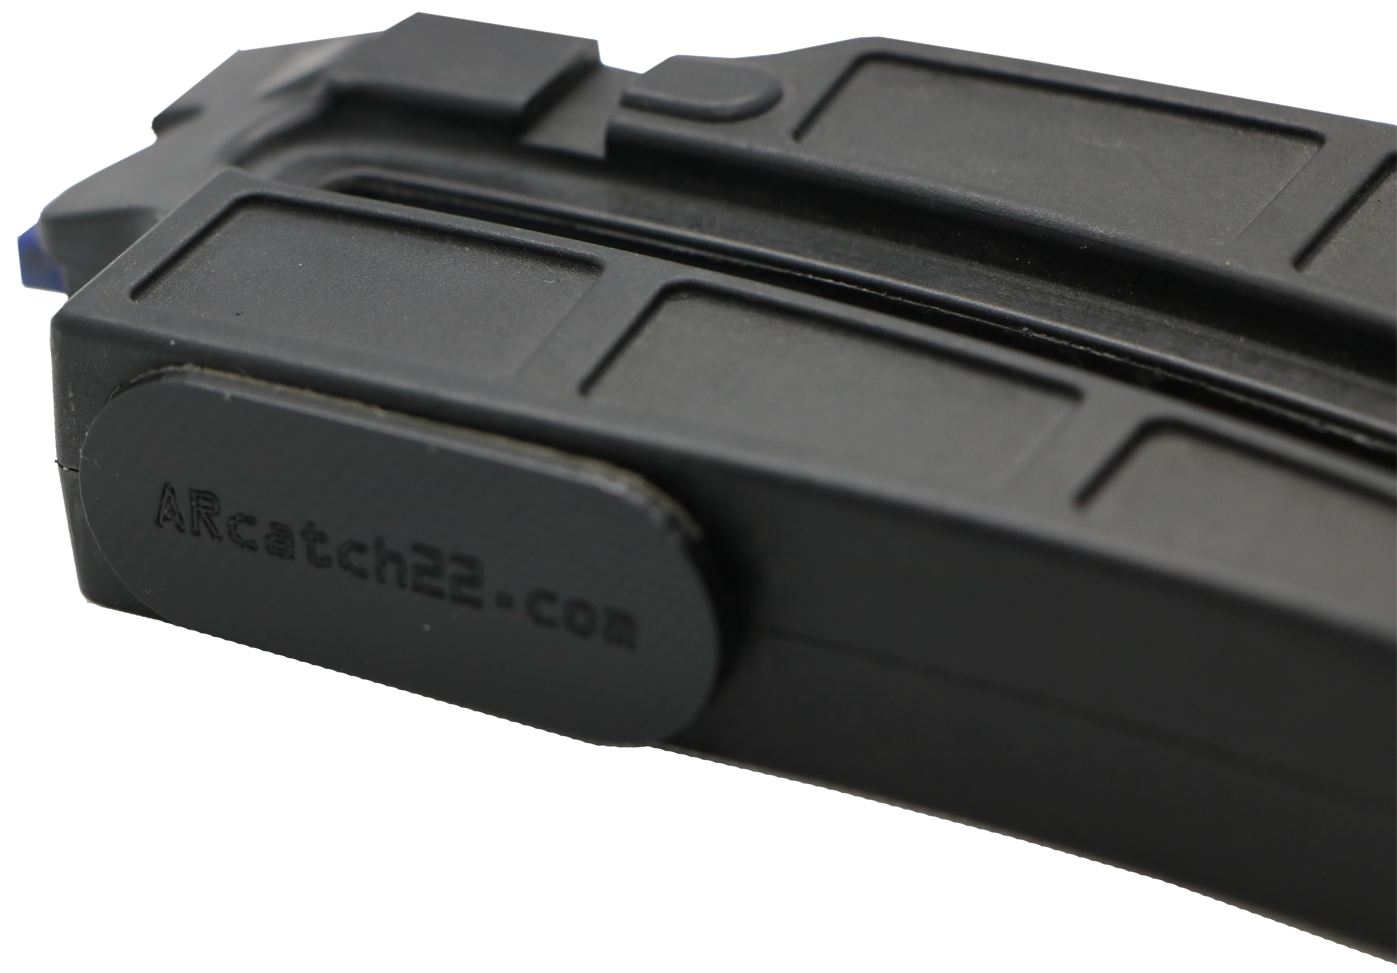 FOR USING S&W 15-22  <br>MAGAZINES IN YOUR AR-15